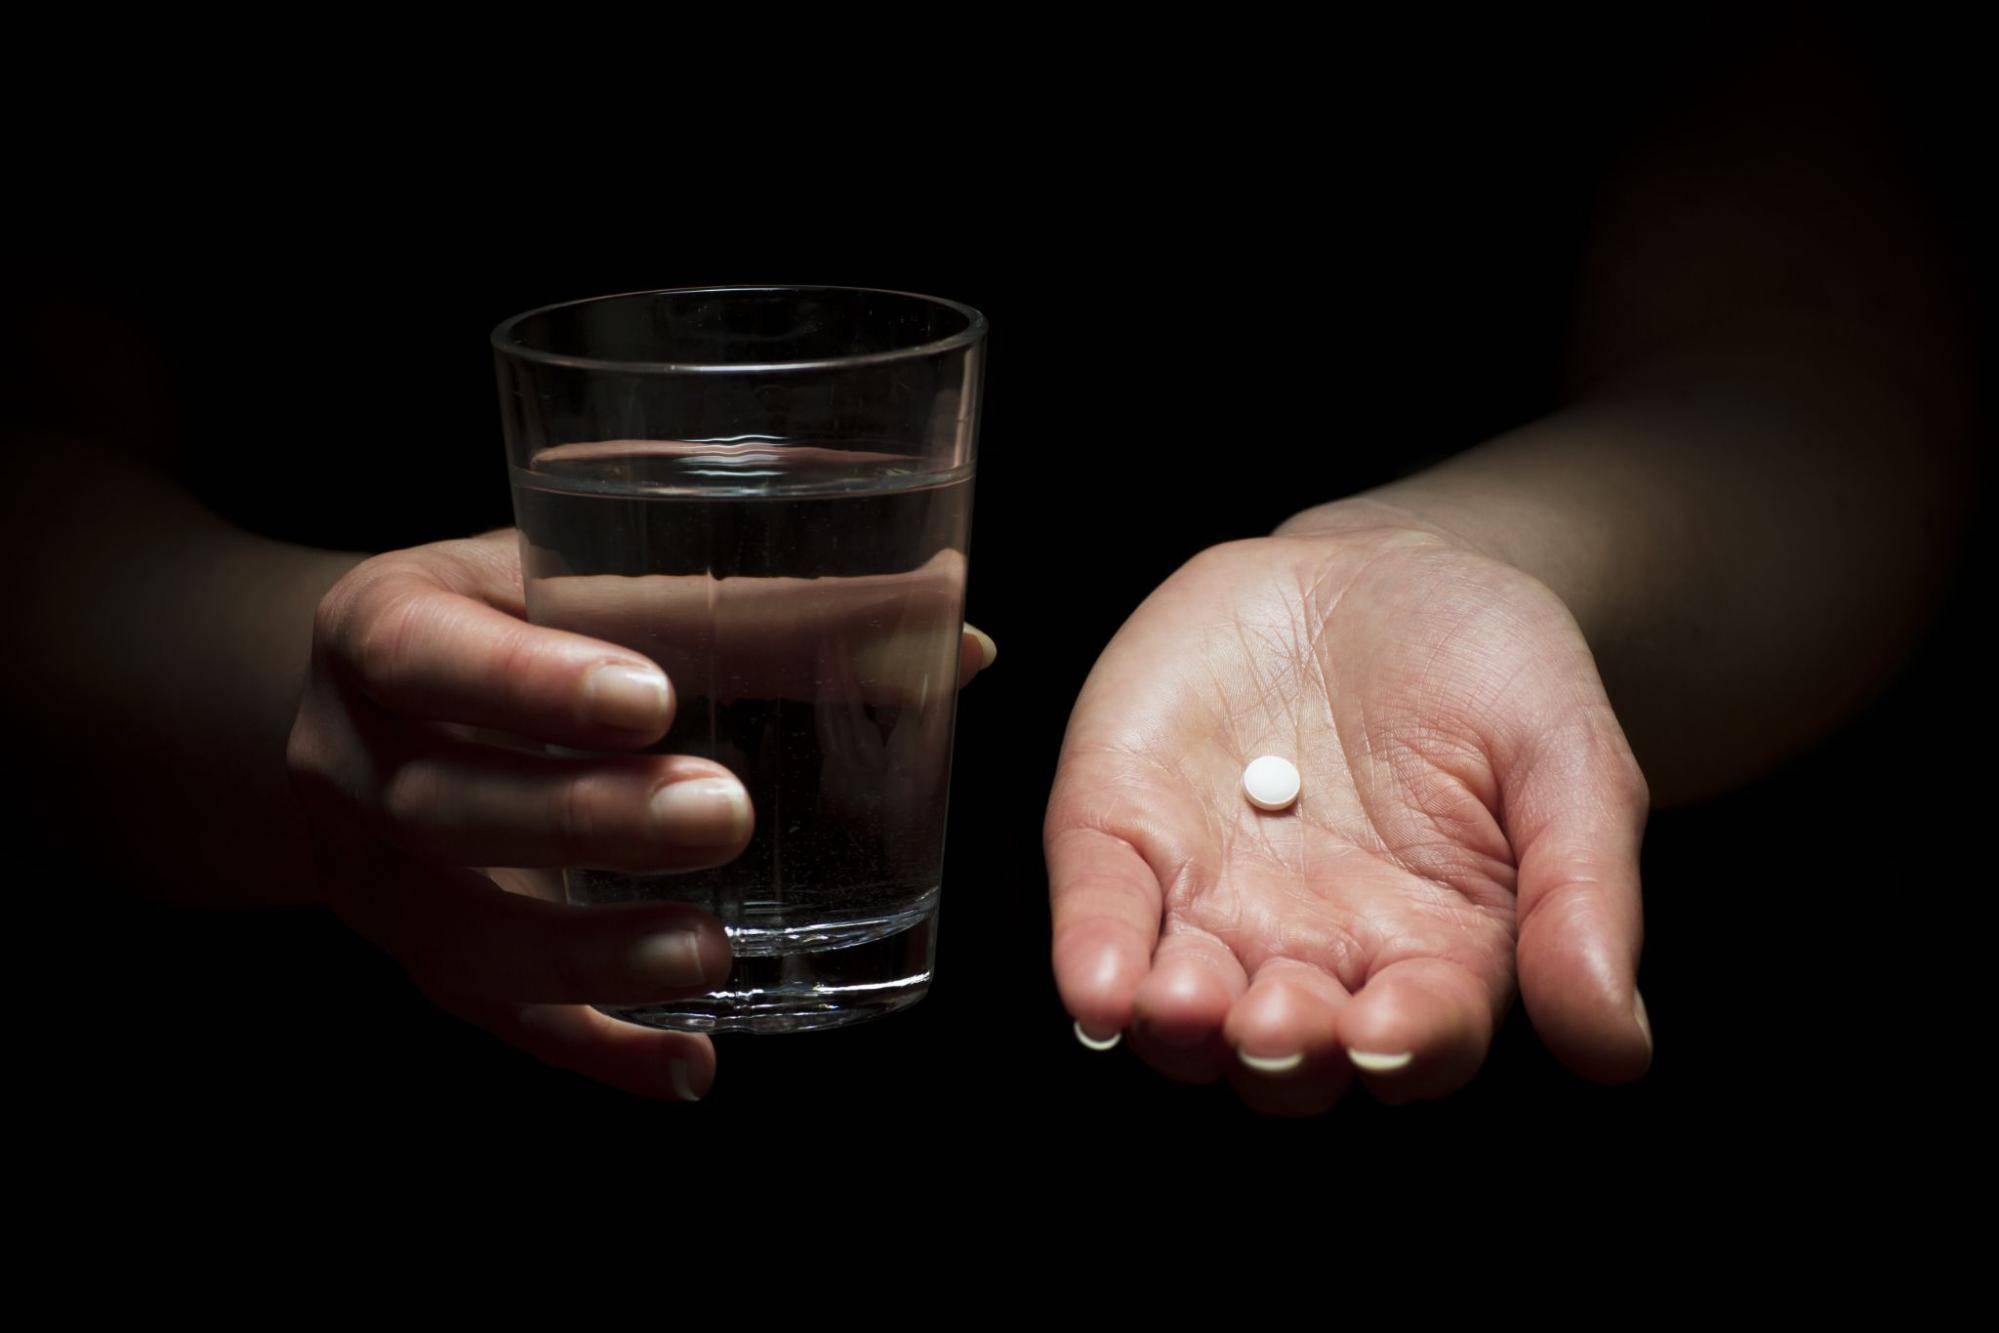 pill in hand, glass of water in other hand